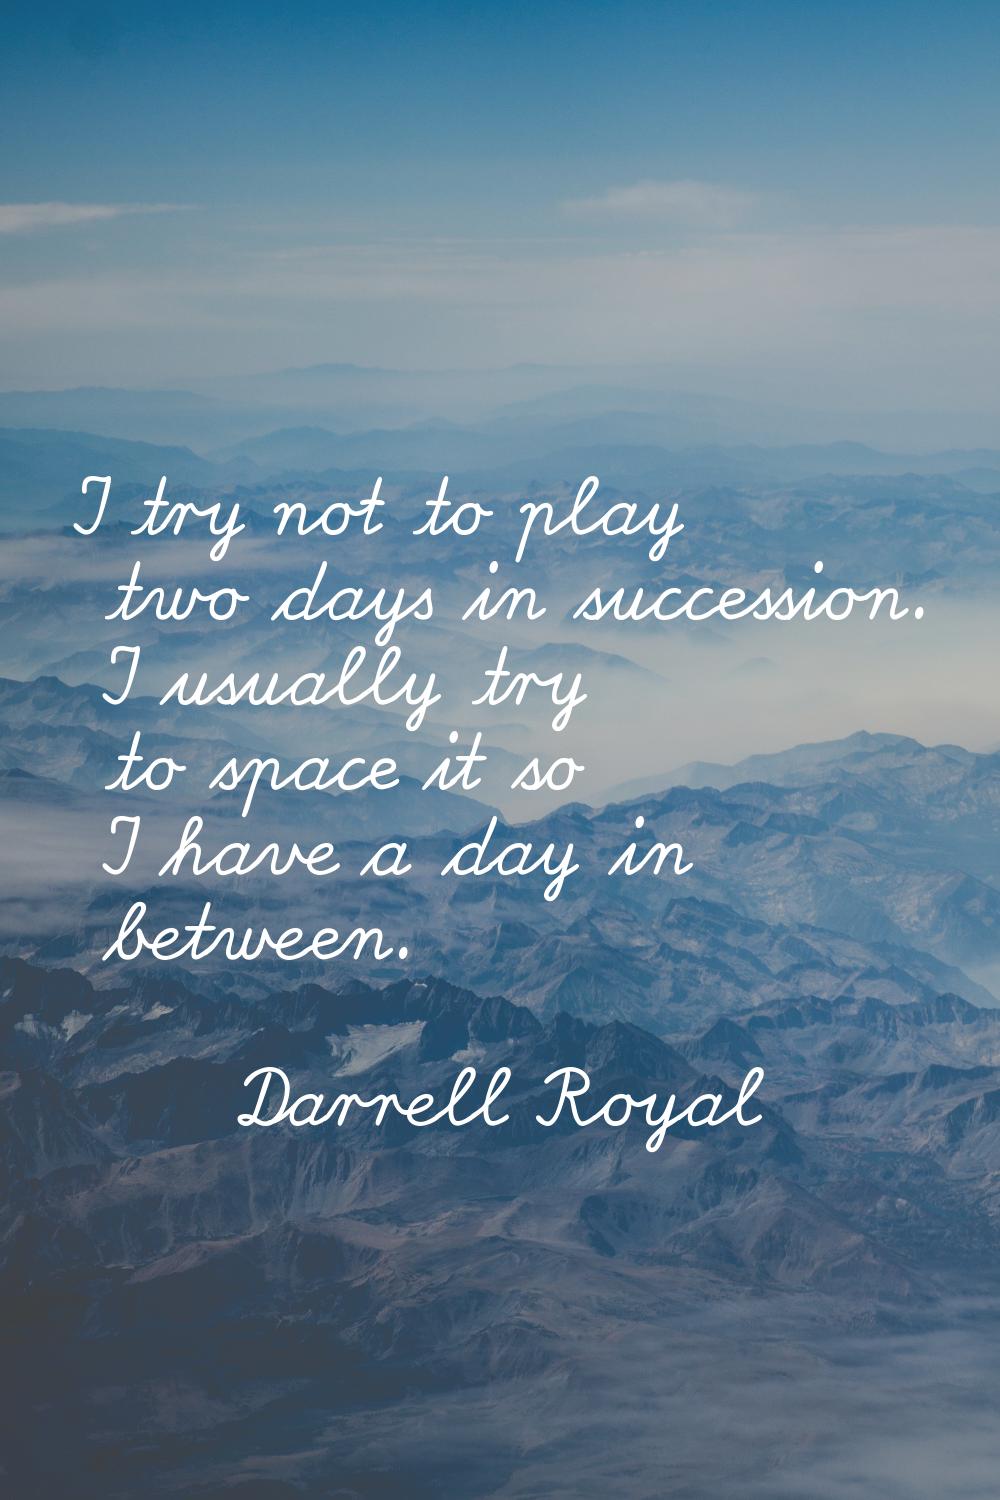 I try not to play two days in succession. I usually try to space it so I have a day in between.